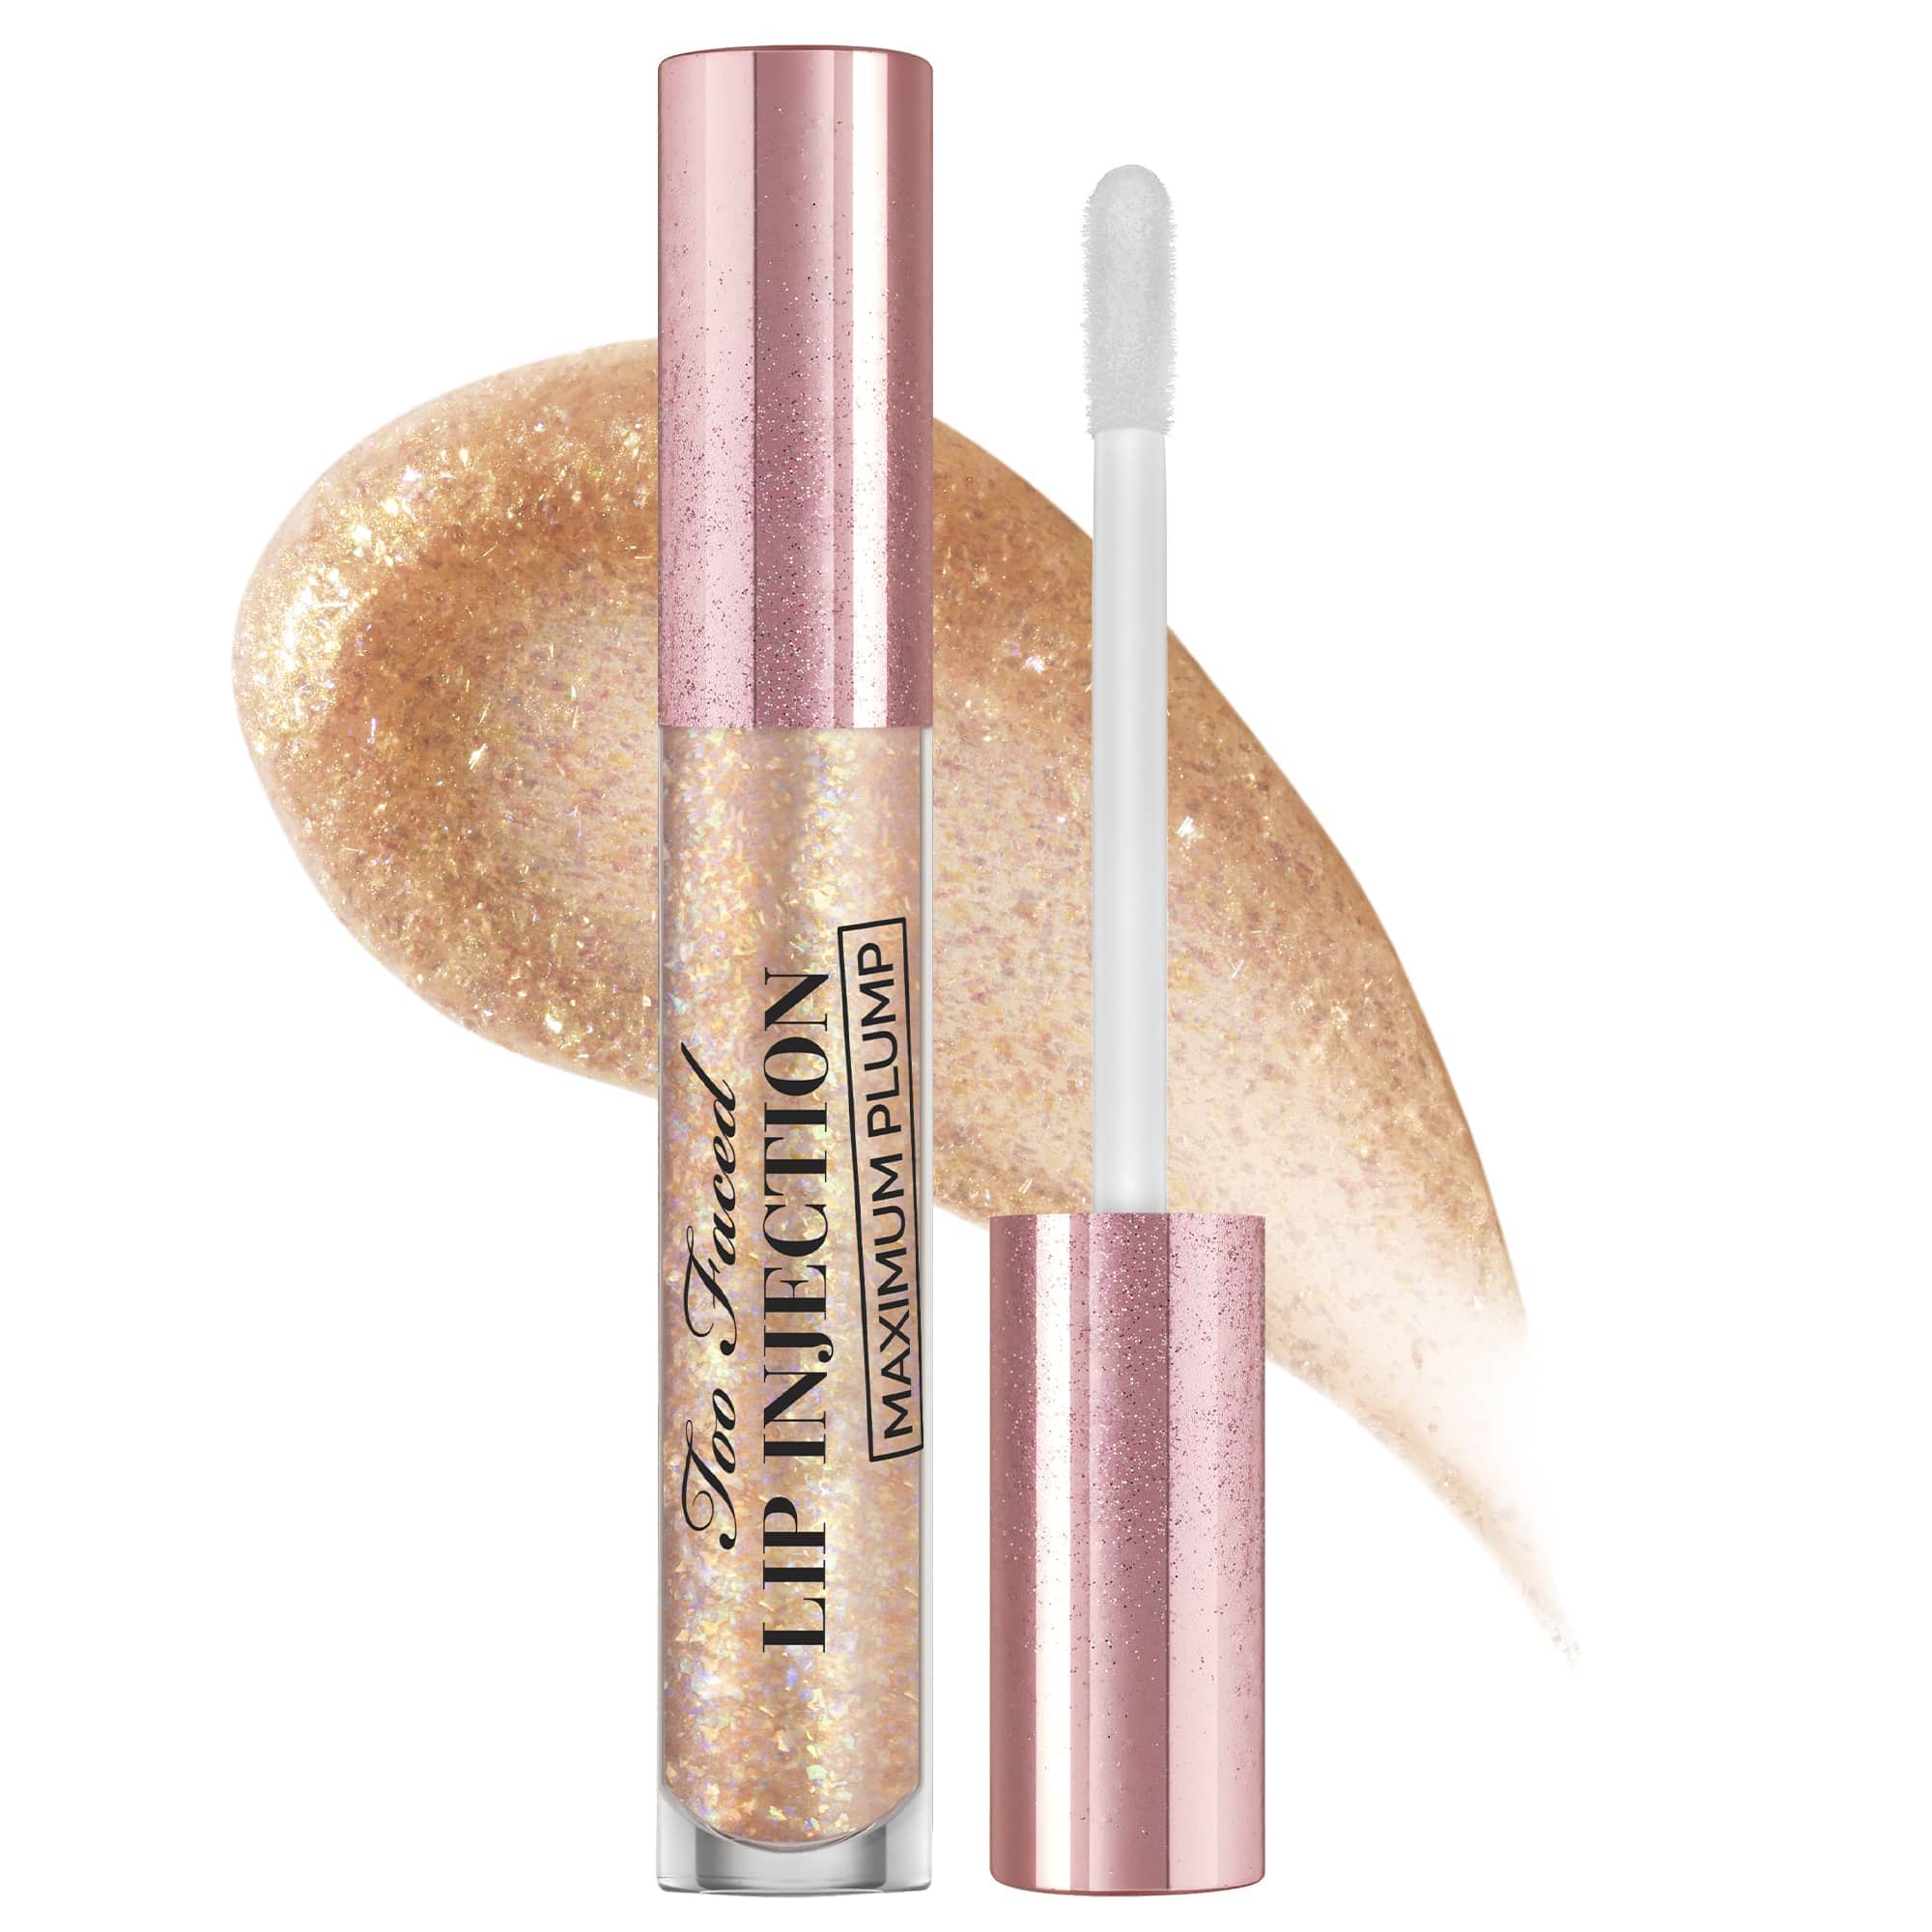 image a a tube of golden sparkly lip gloss and plumper from Too Faced cosmetics